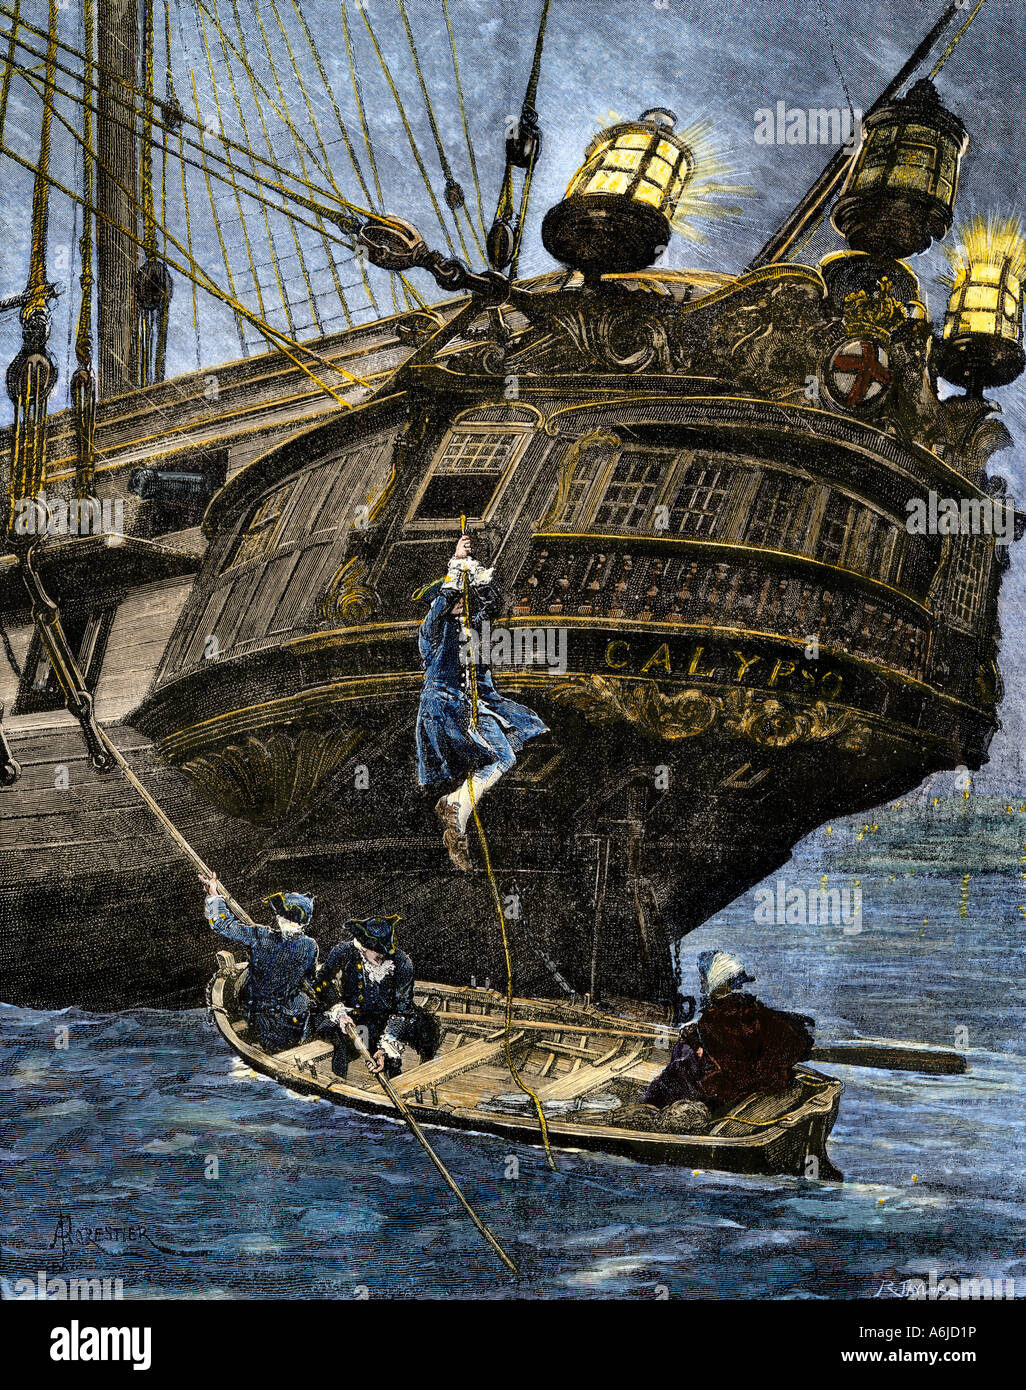 Men descending from the stern of a sailing ship 1700s. Hand-colored woodcut Stock Photo